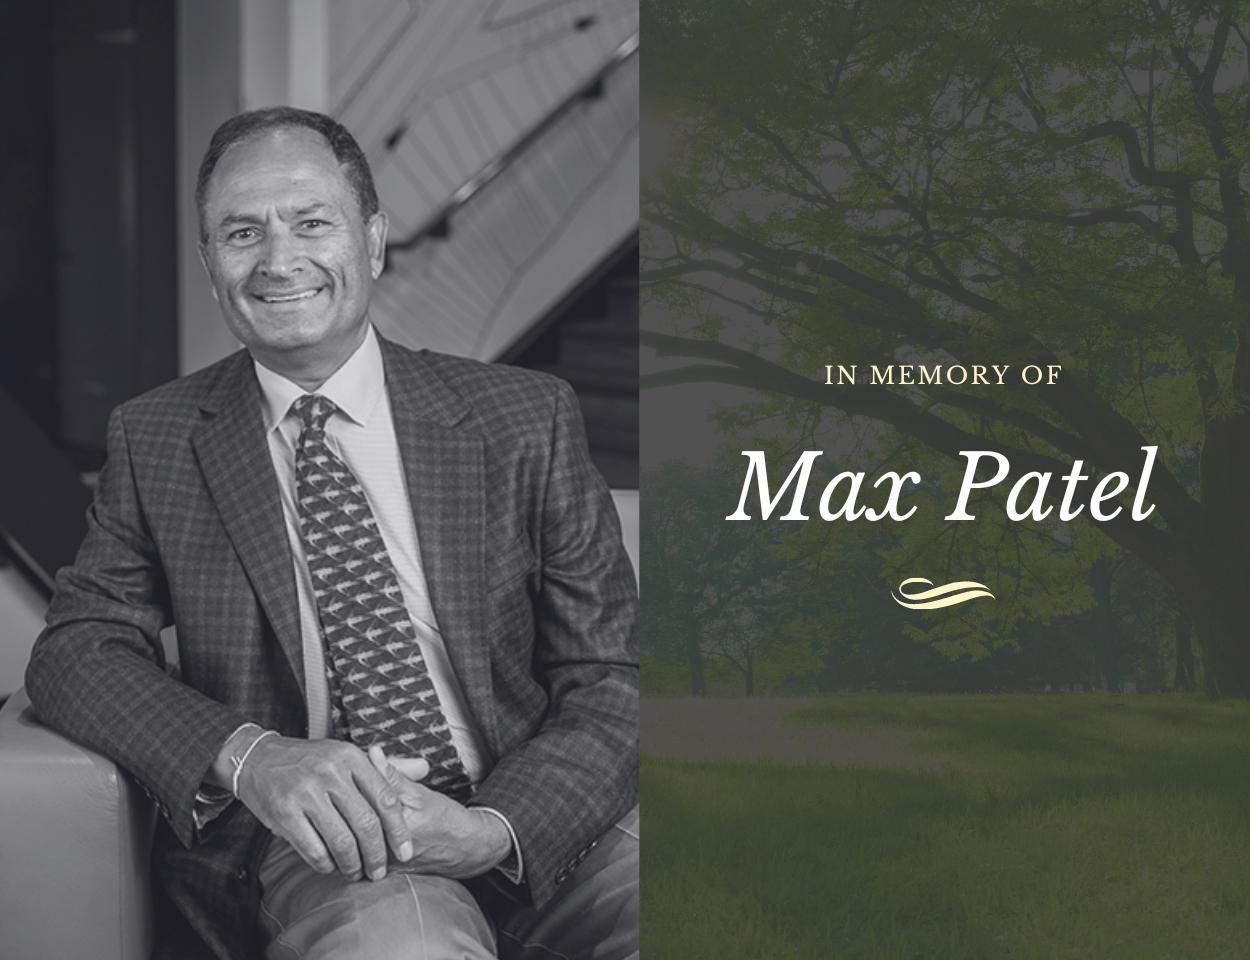 Max Patel: Cherishing the Memory of a Remarkable Teammate